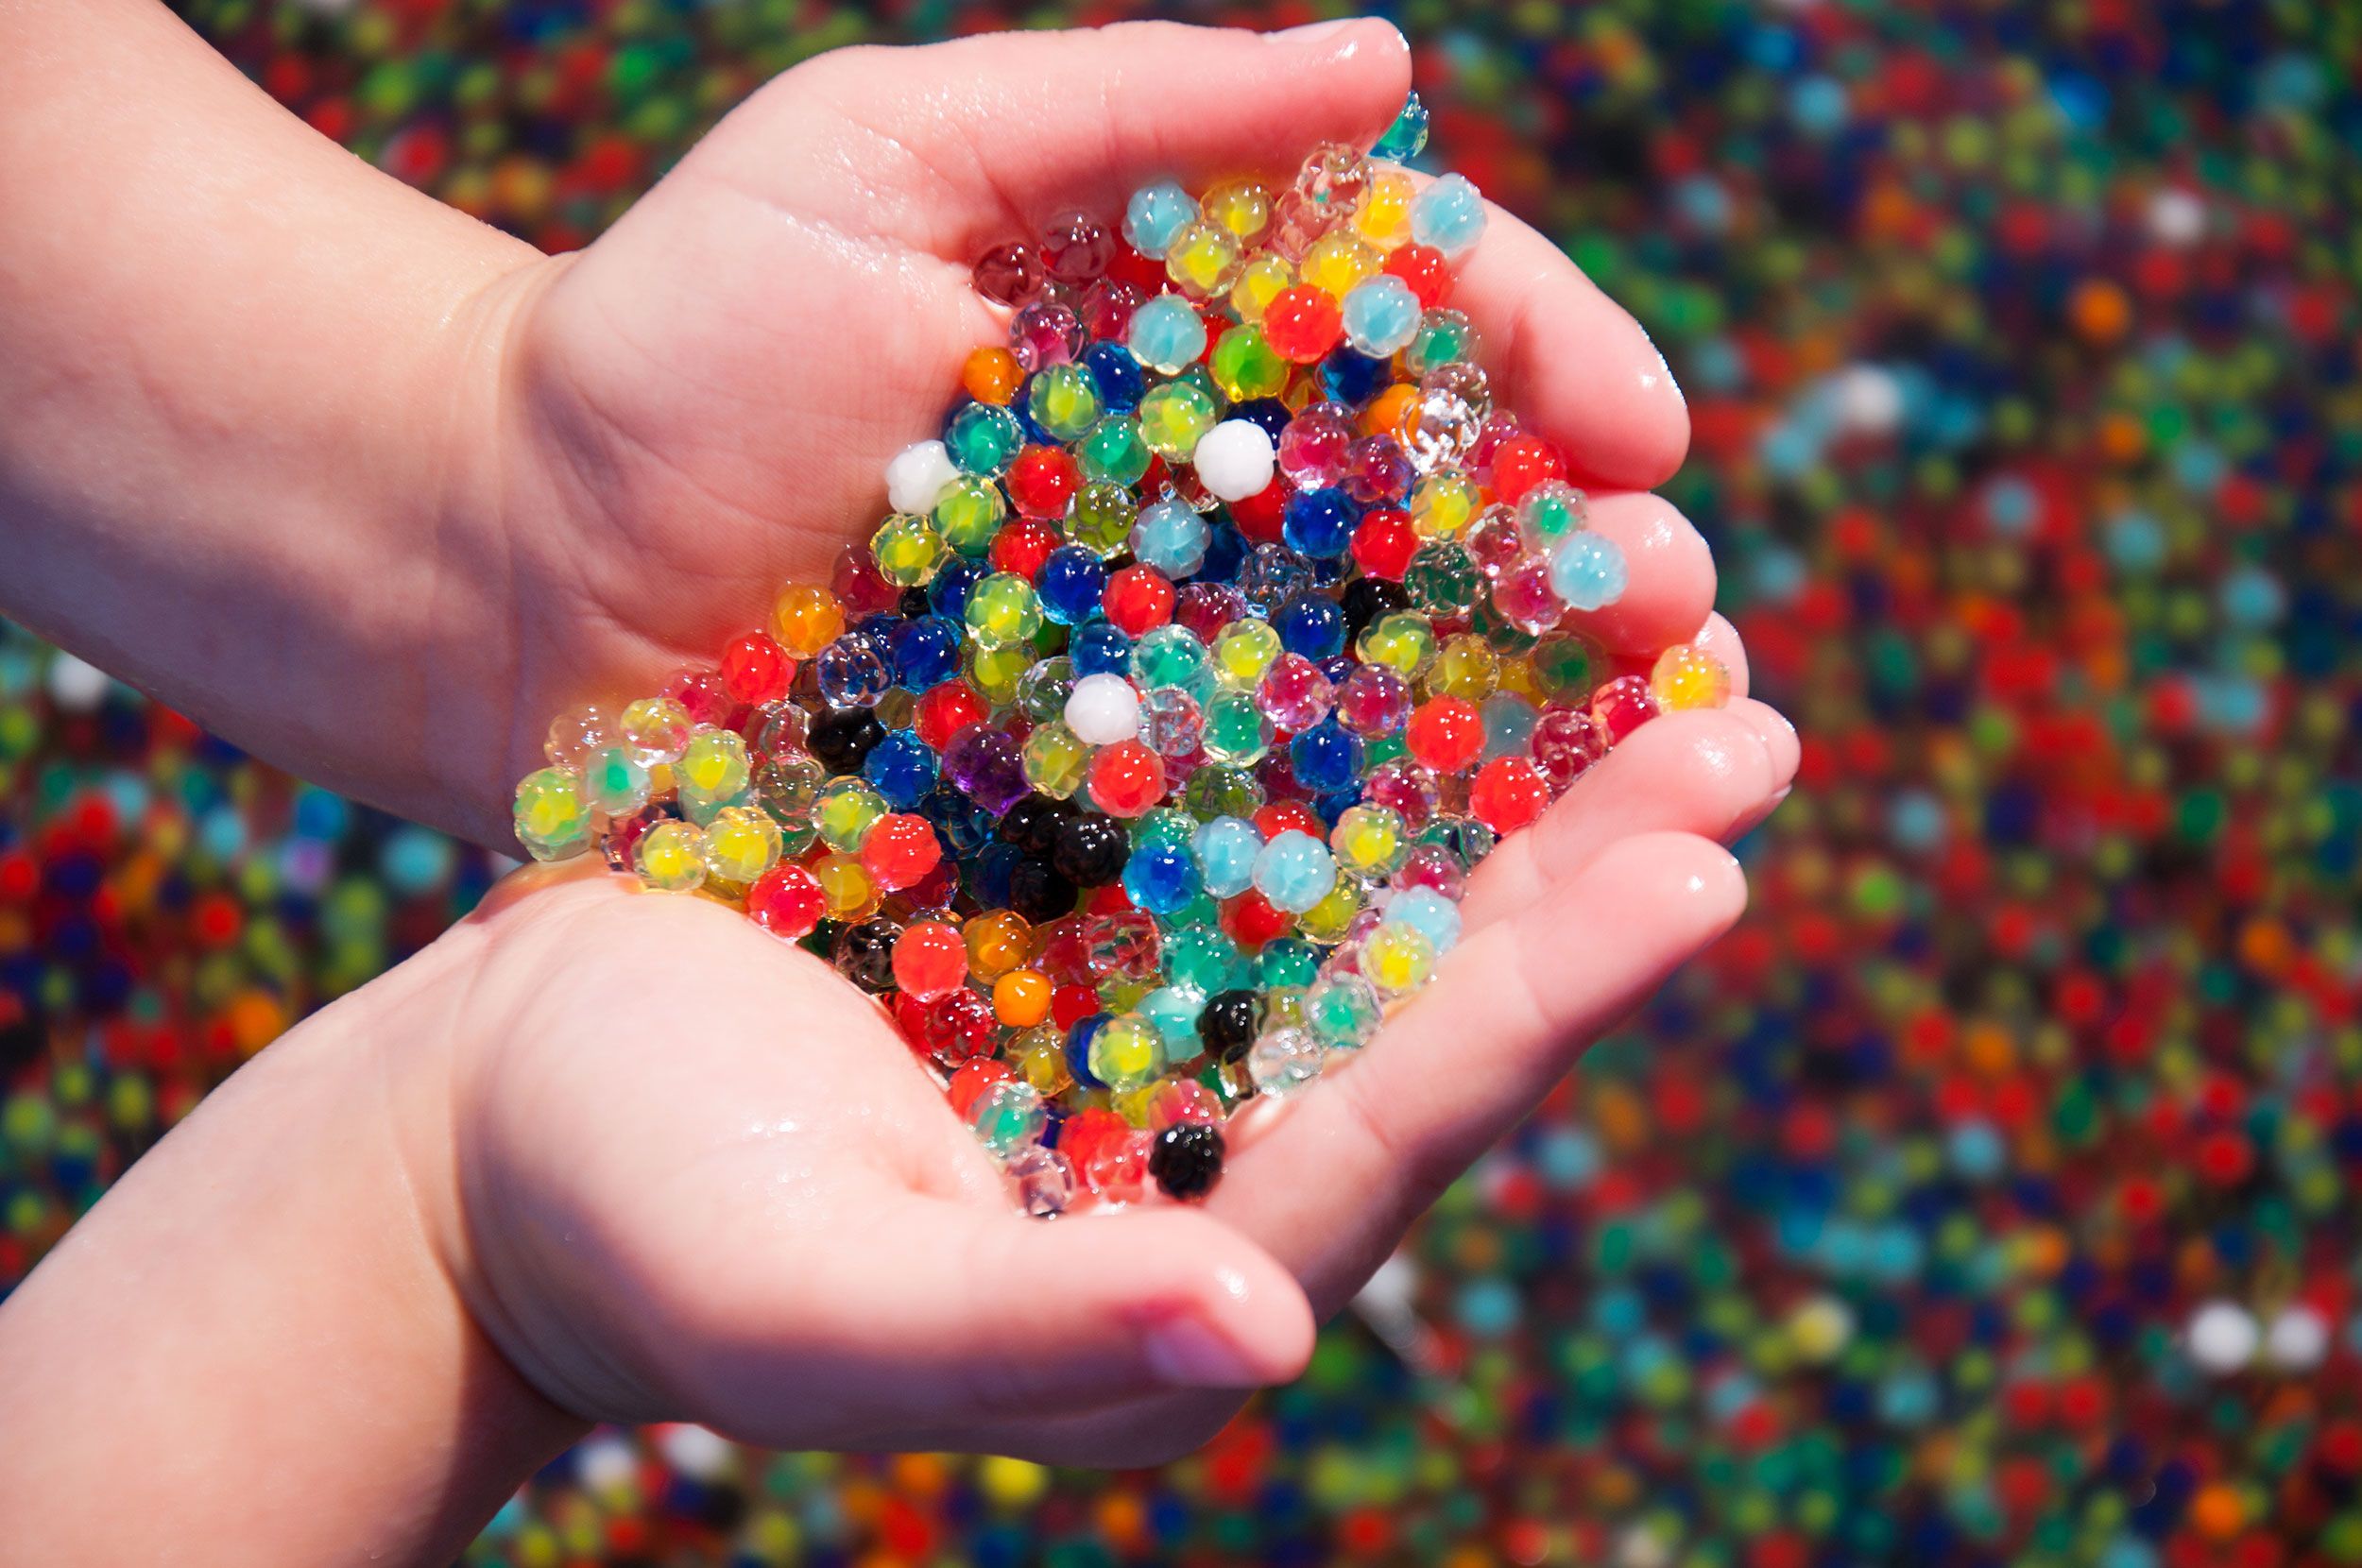 Water beads: Lawmaker calls for national ban on children's toy due to  health risks